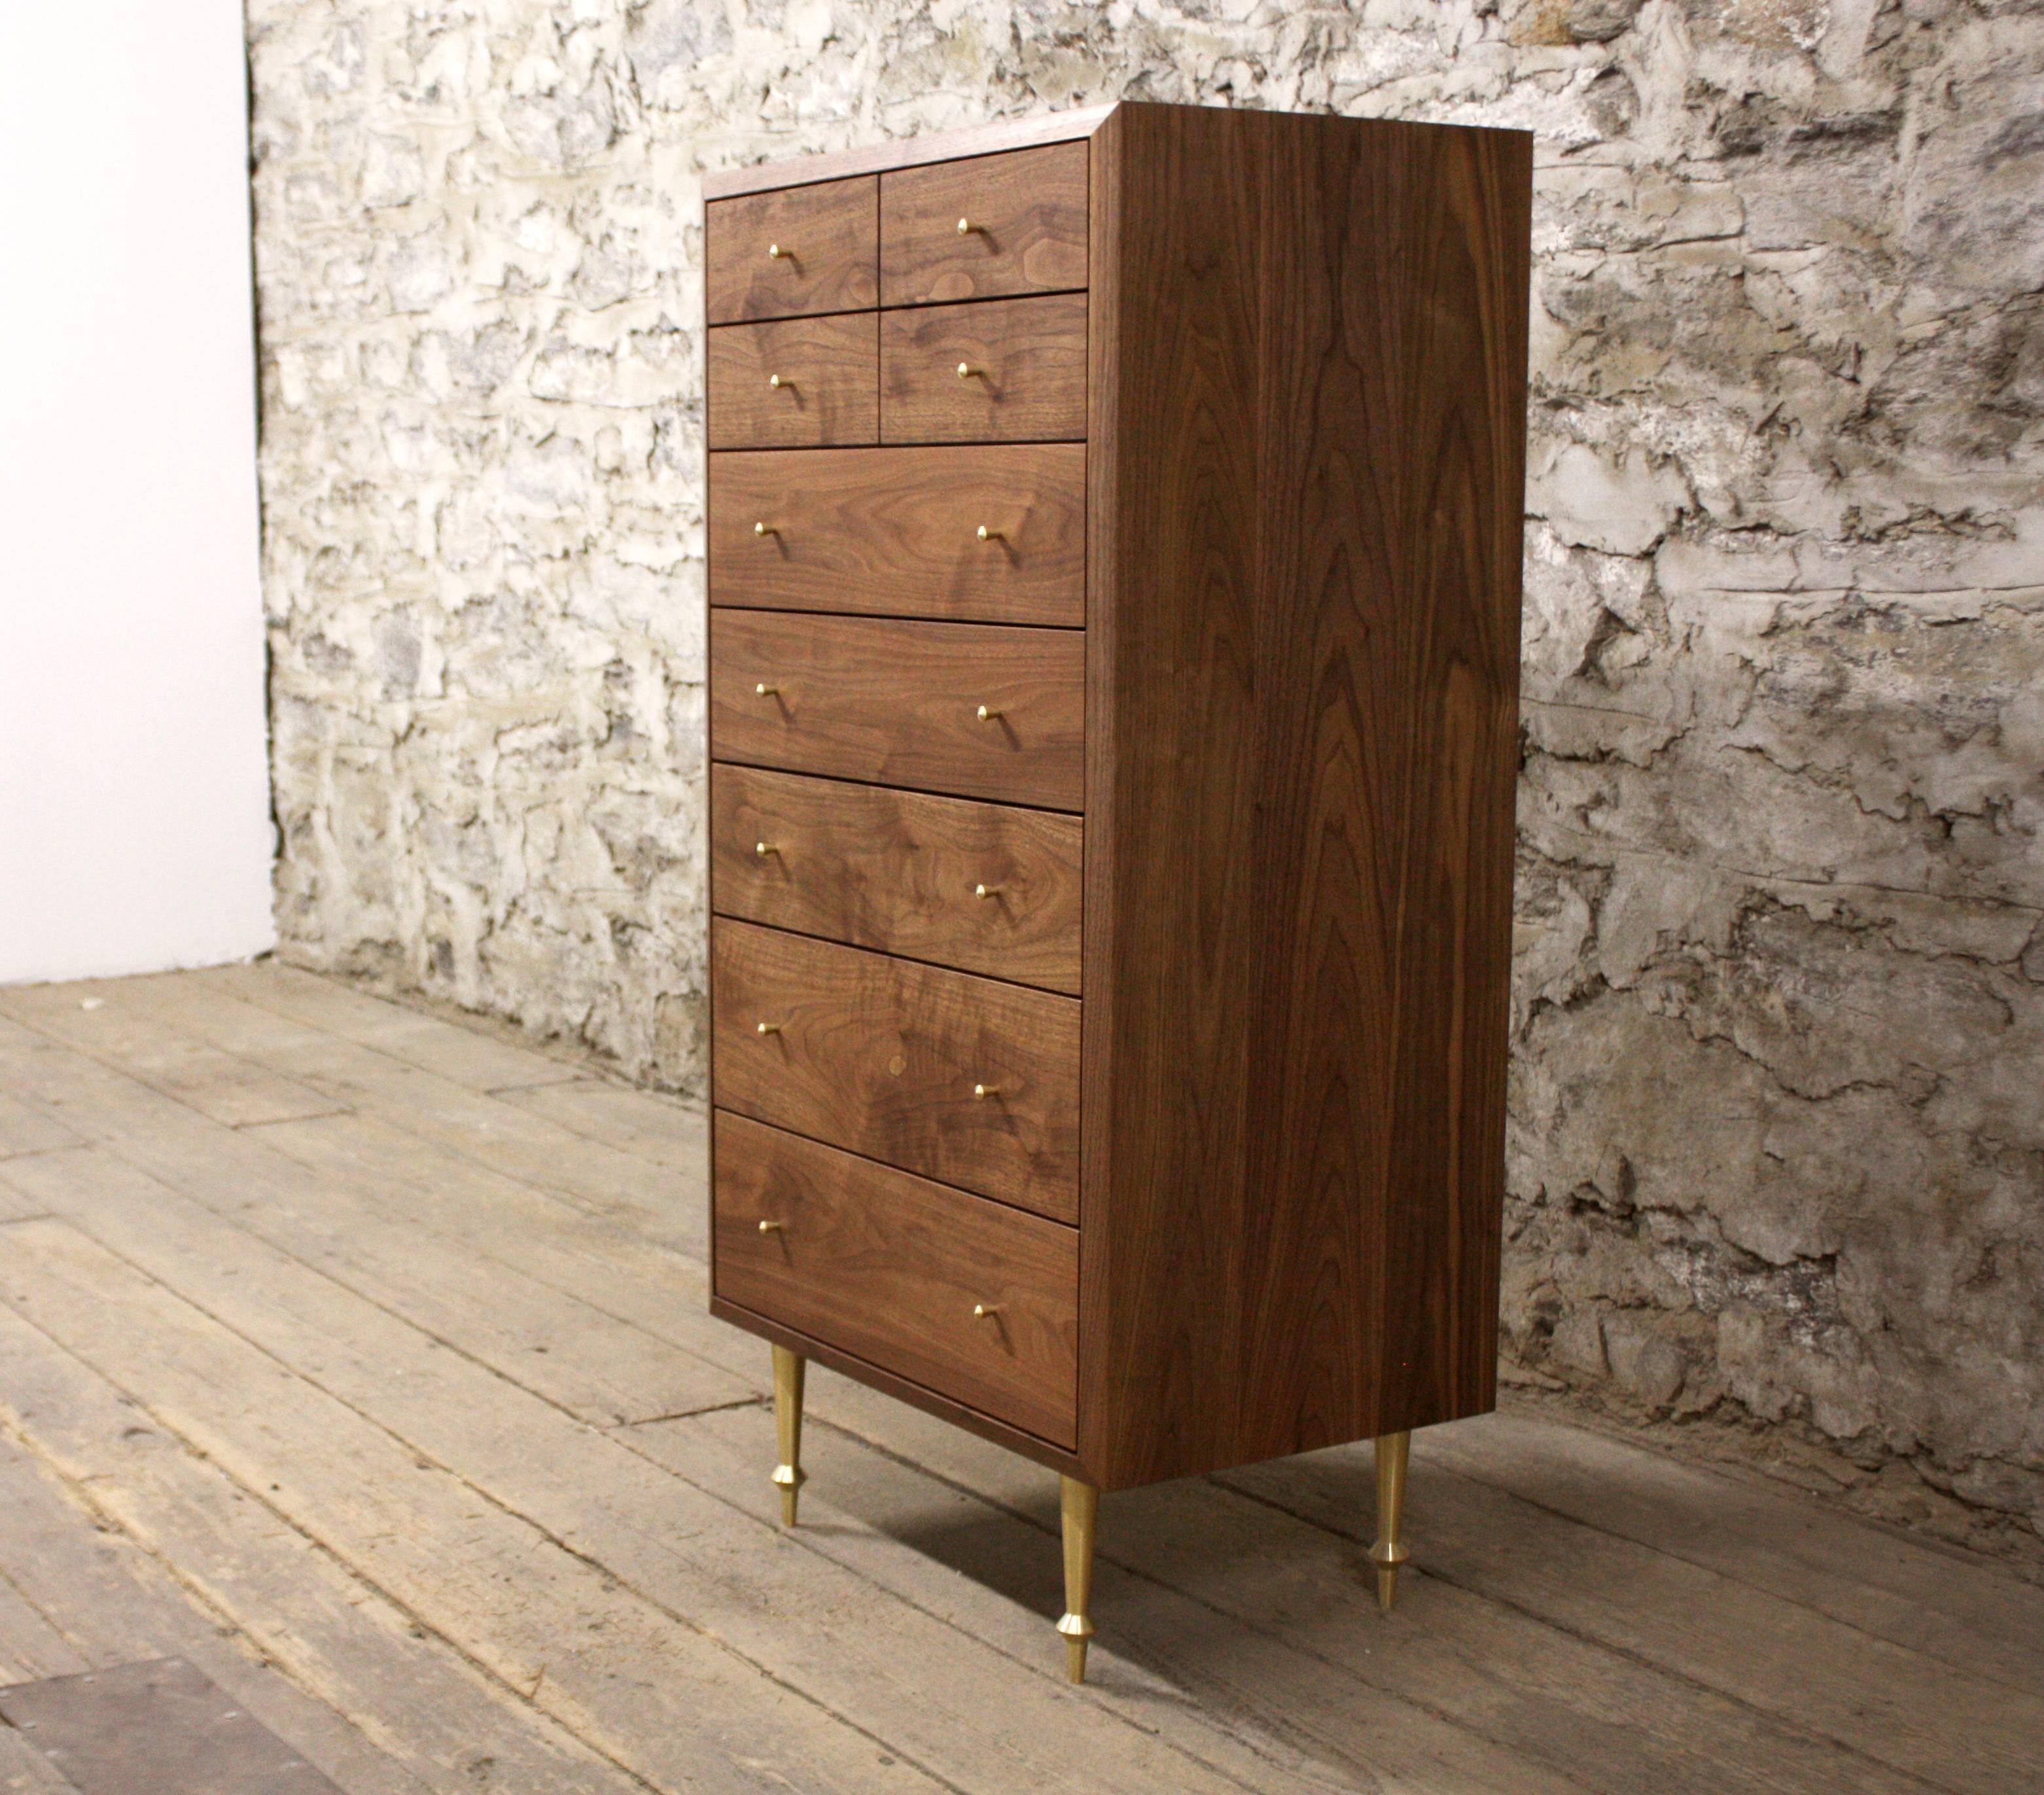 As shown:
Solid walnut with custom turned brass legs.
Solid poplar drawers with turned brass drawer pulls.
Fabric drawer linings upon request for an additional fee.
Oil and wax finish.
Dimensions: 52” H x 26” W x 18” D.
Custom sizing,